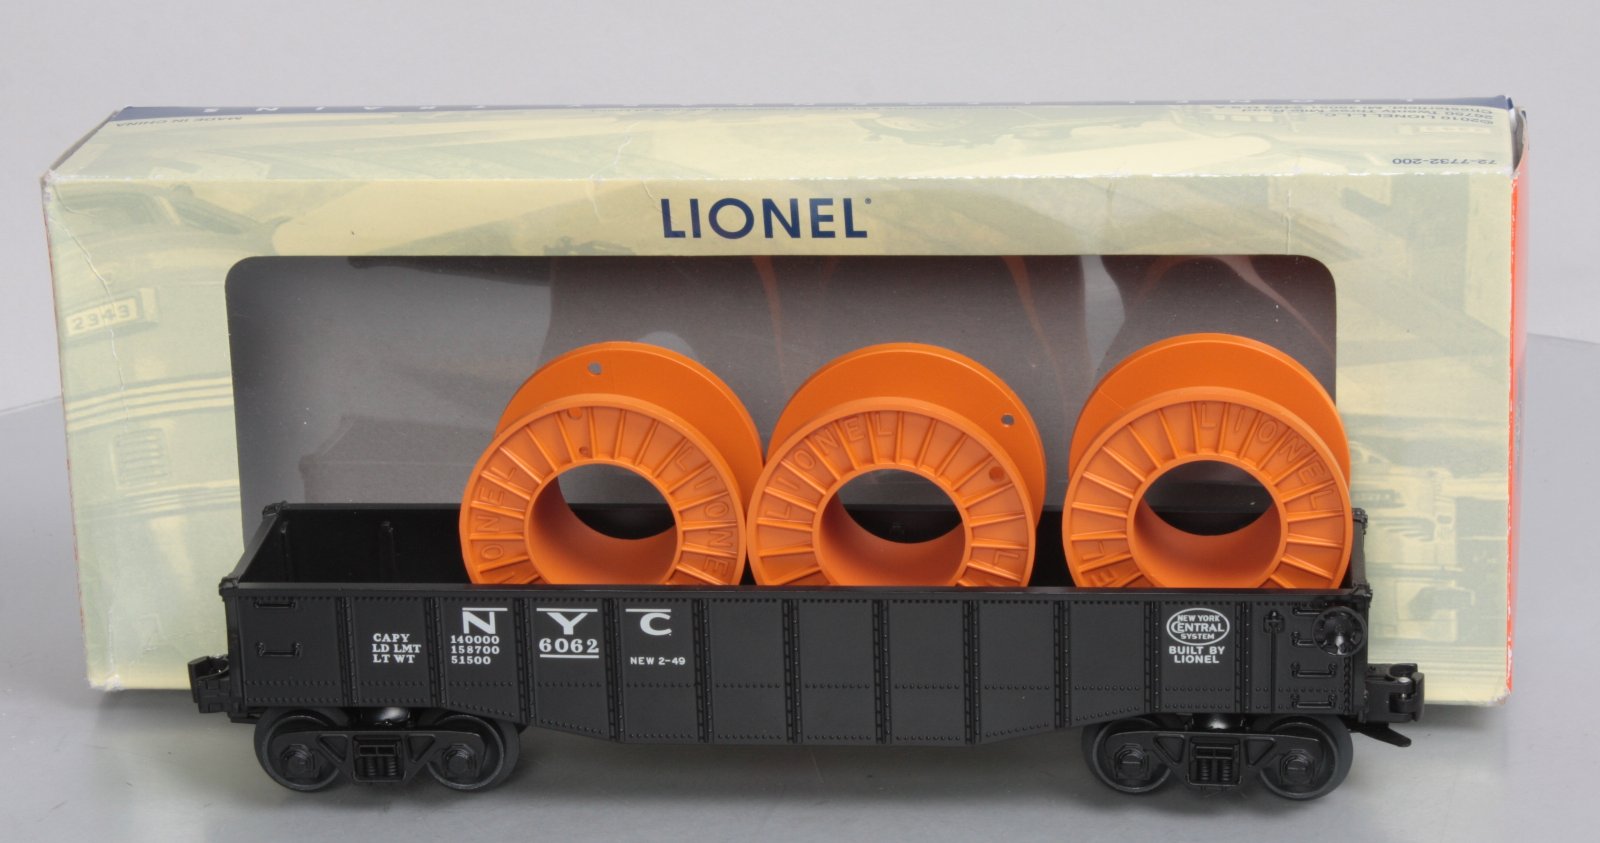 Lionel 6-27735 PWC 6062 New York Central Gondola With Cable Reels